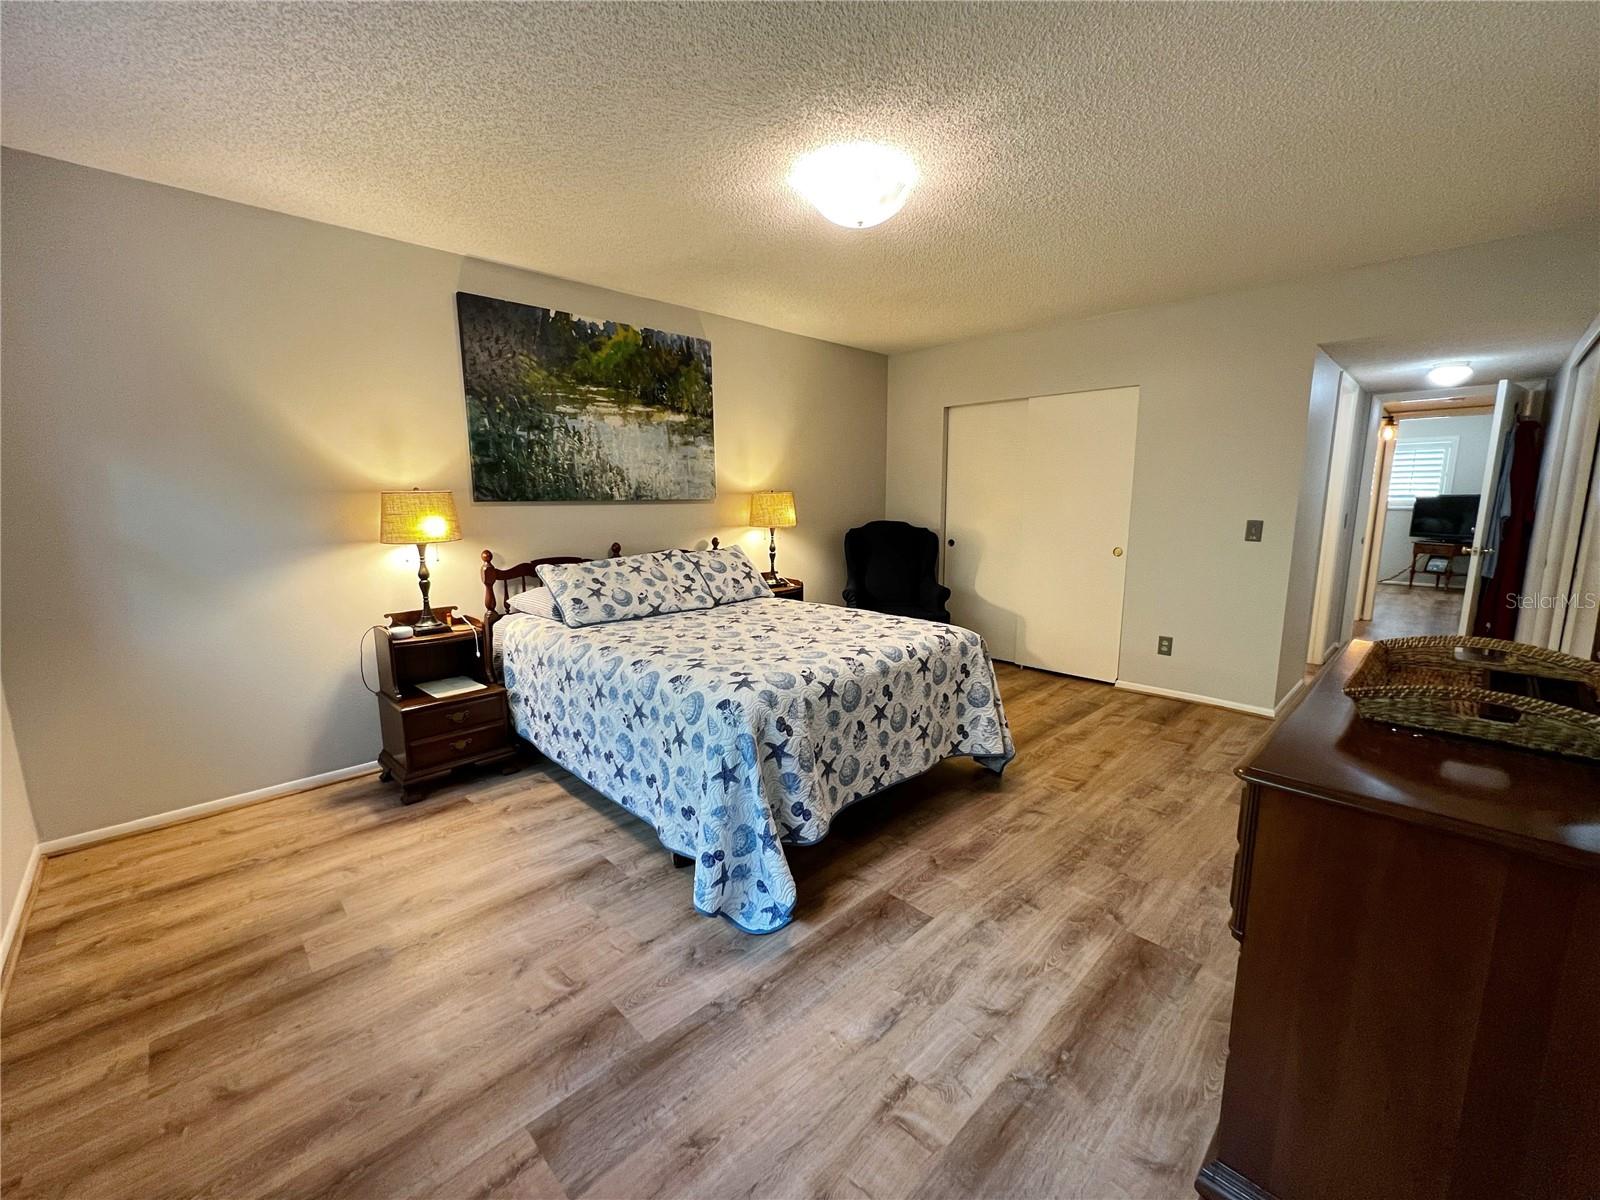 Large master bedroom with two spacious closets.